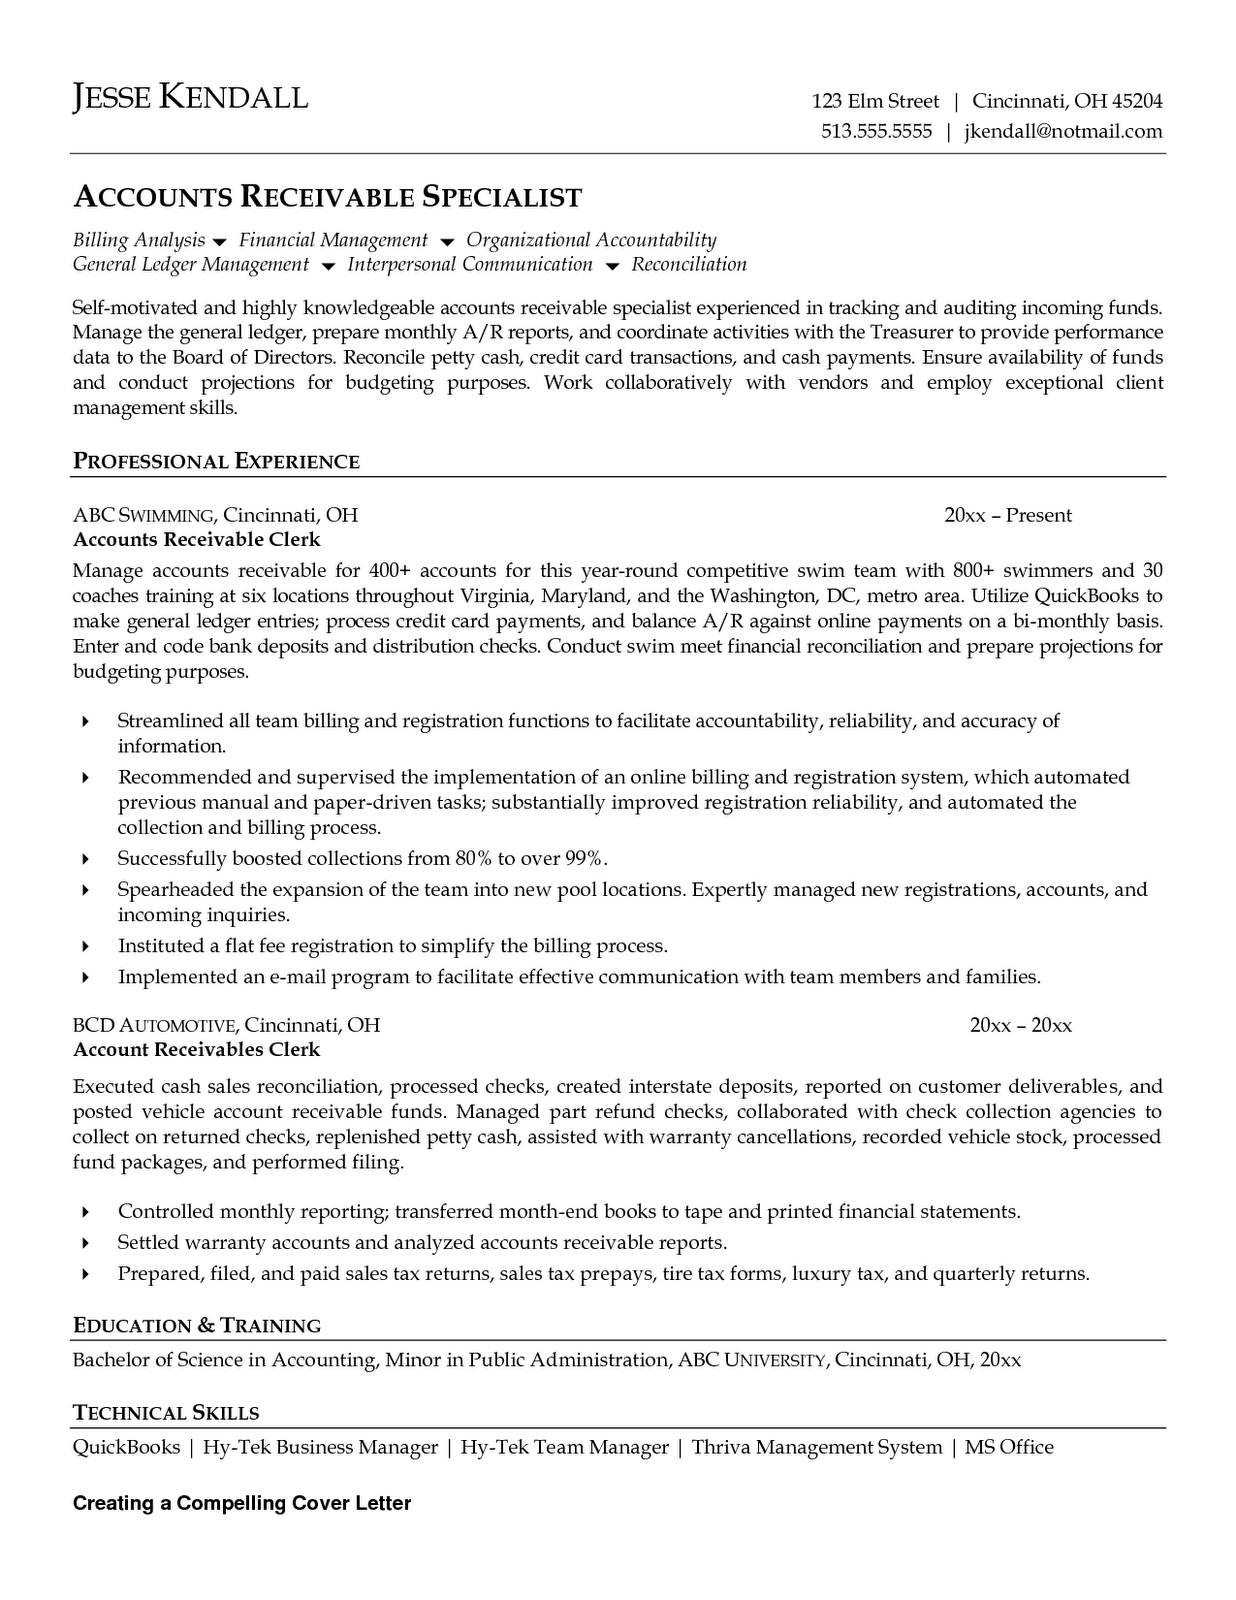 Free shipping and receiving resume samples